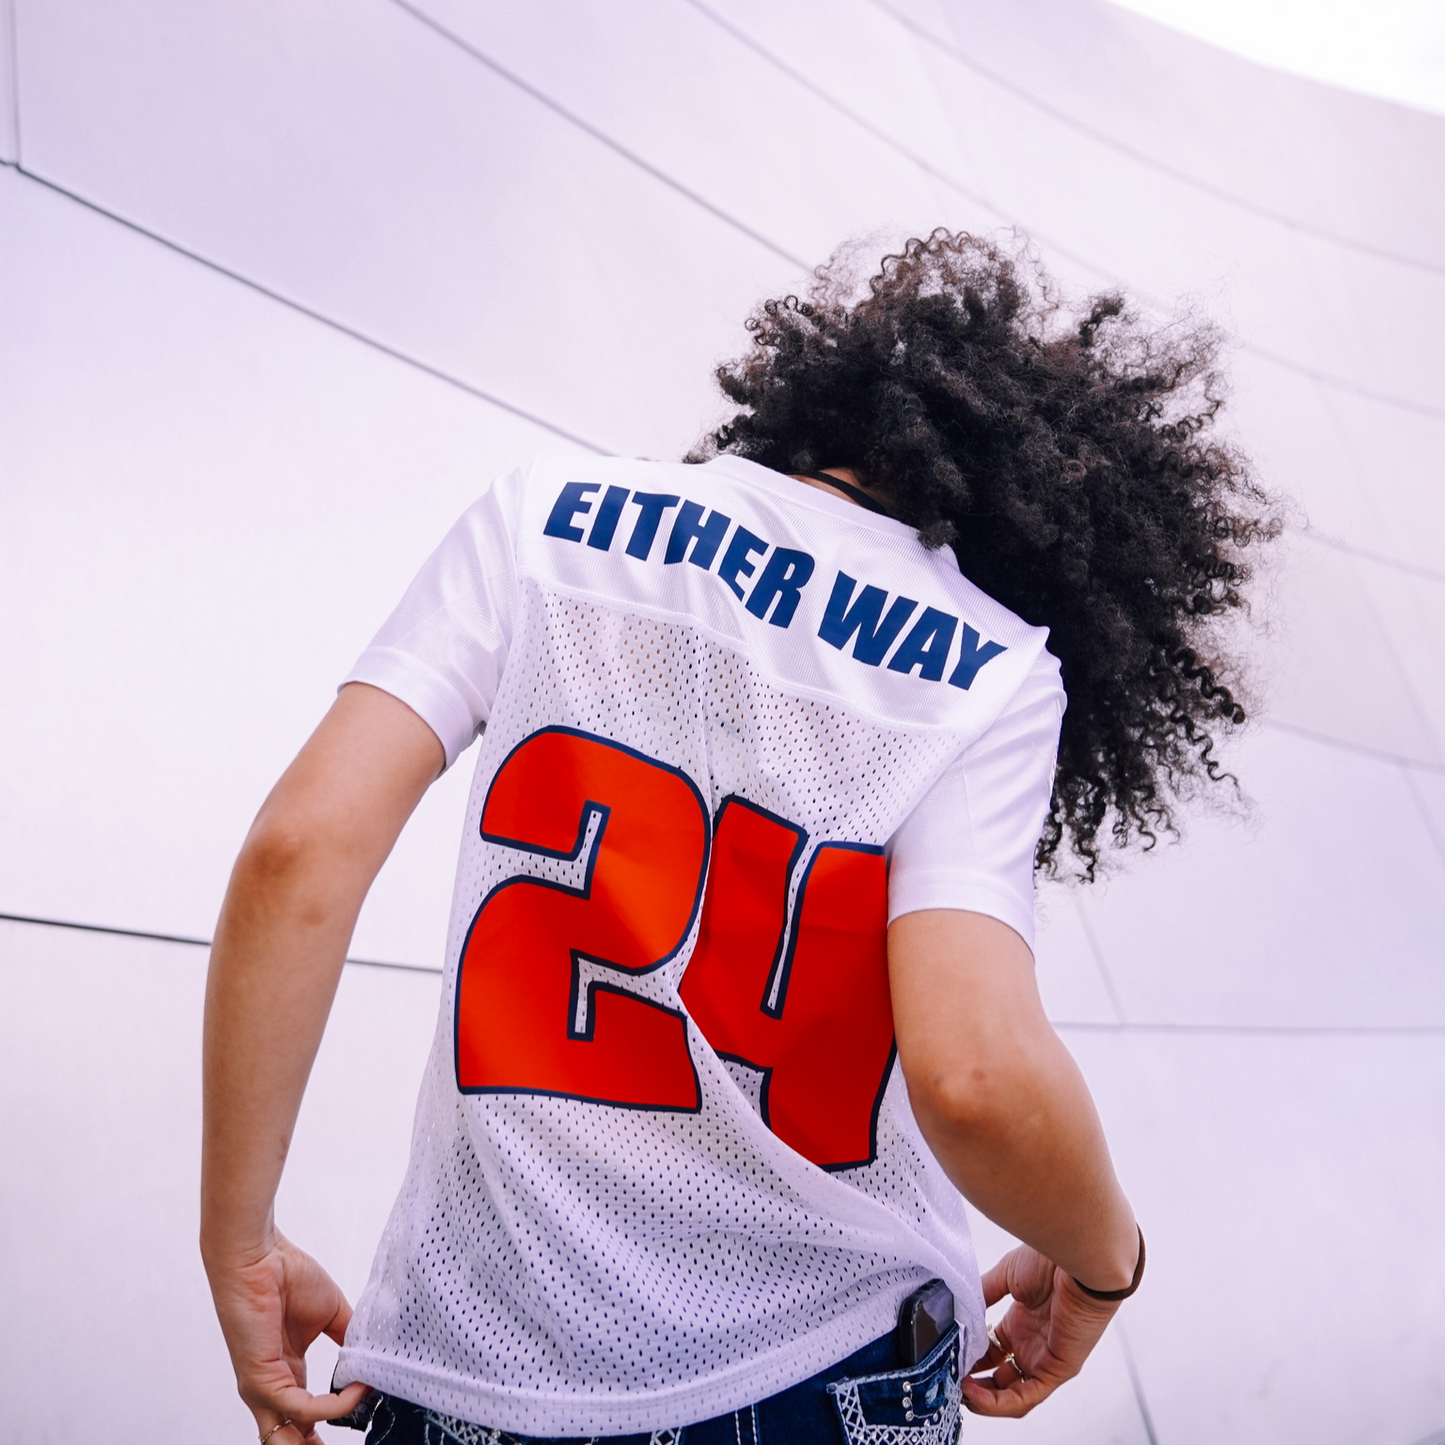 "Either Way" Women's Football Jersey